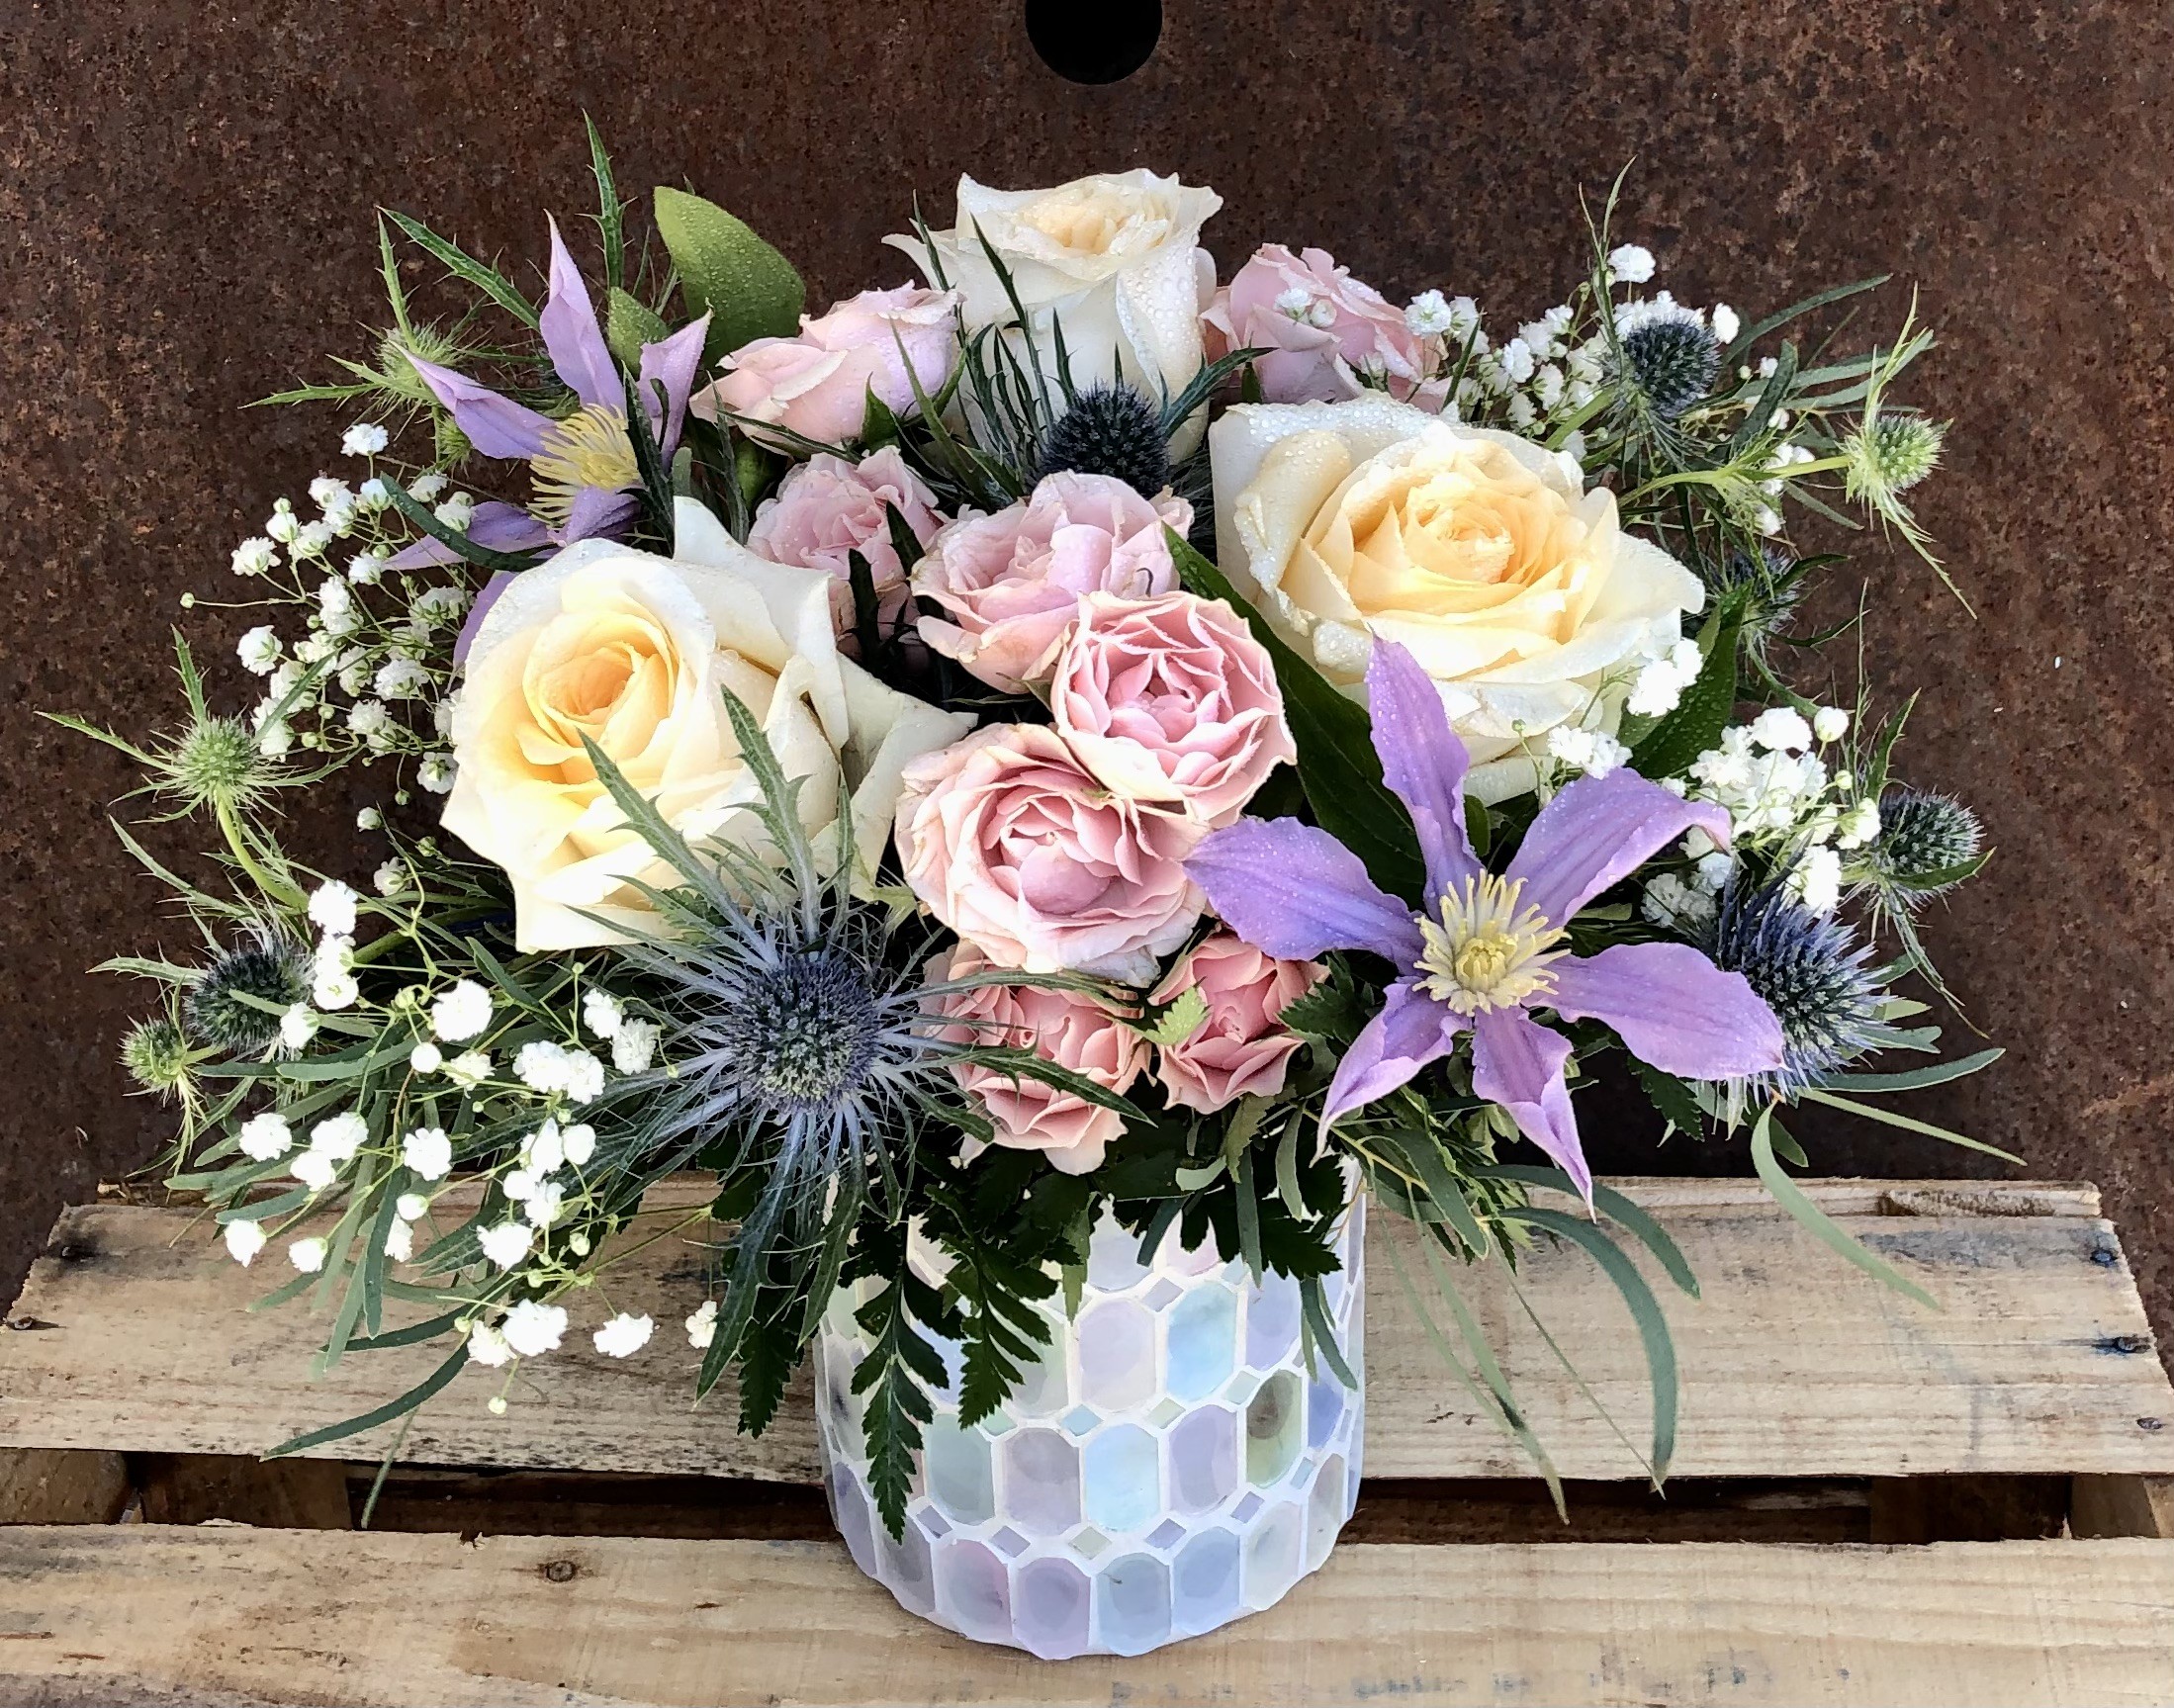 local florist in fort worth texas